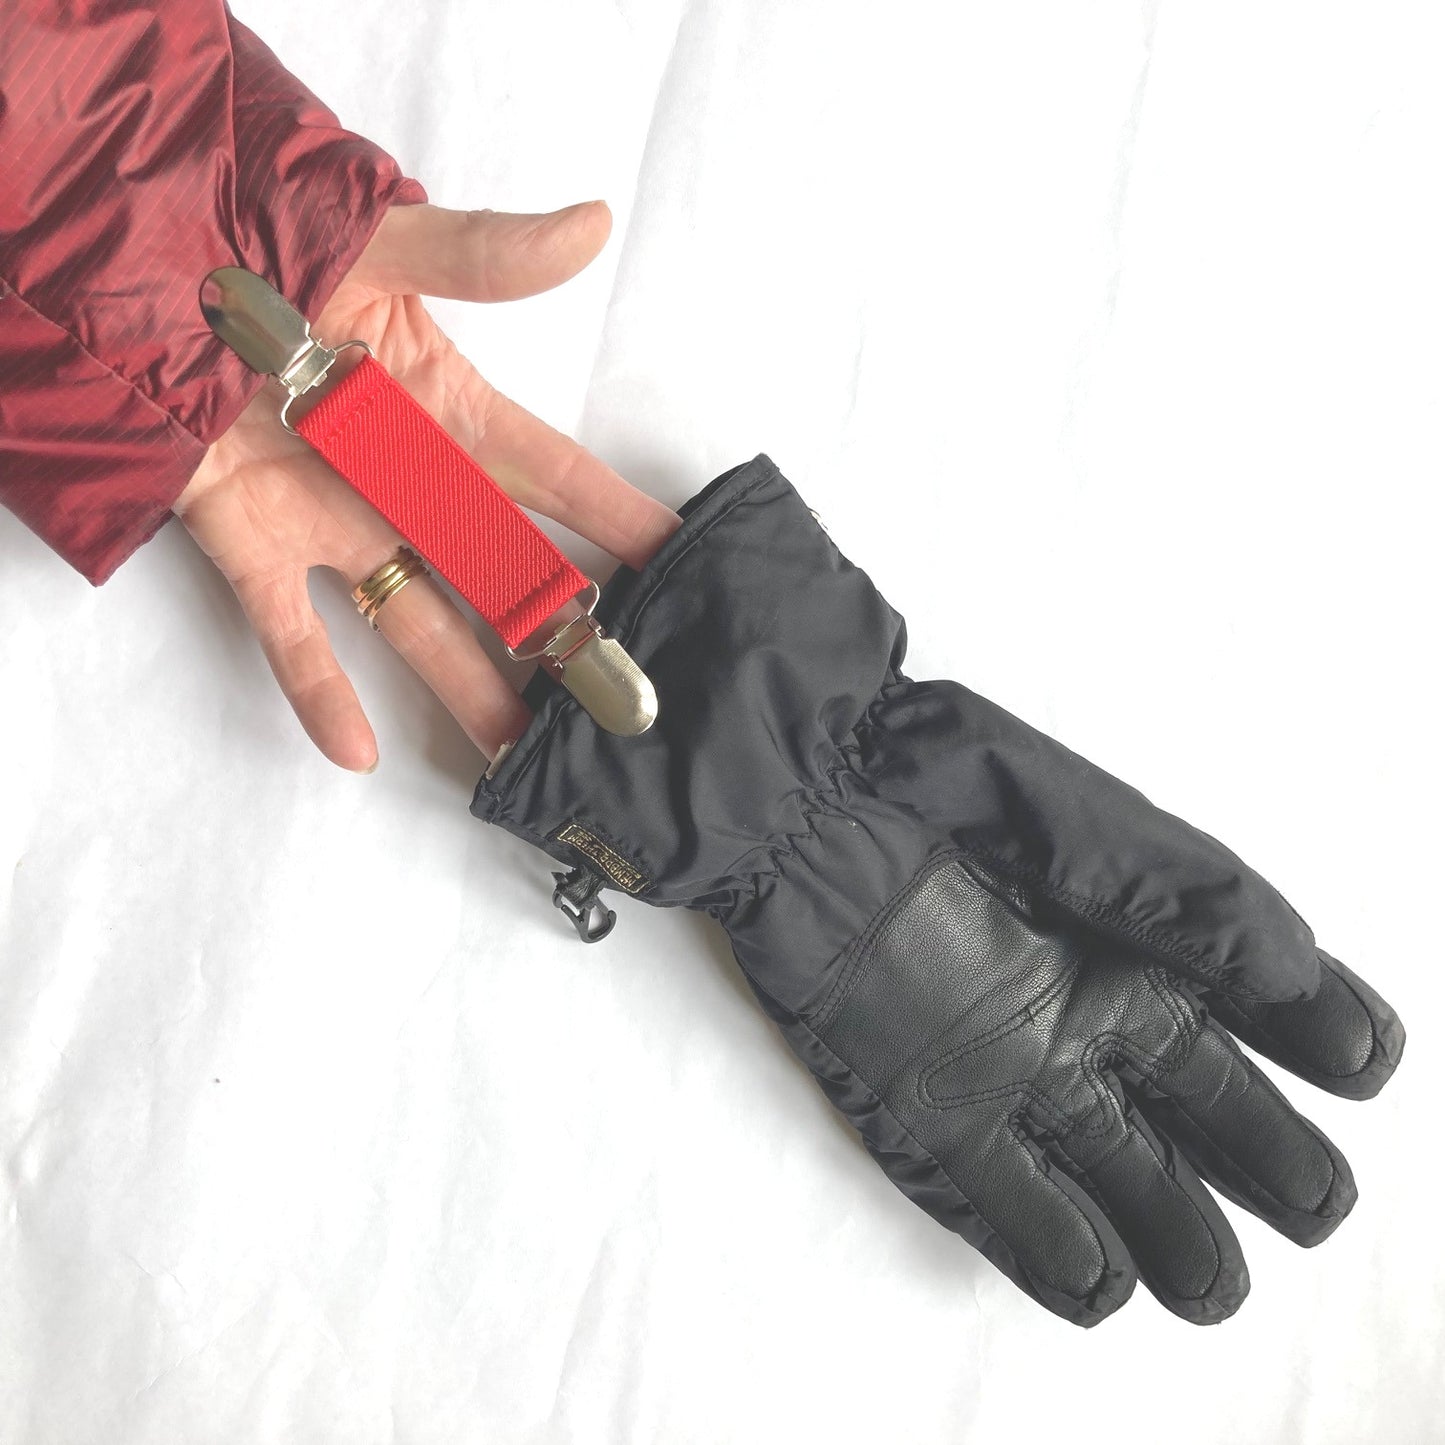 Close up of a red Clip2Cuff attached to a cuff at one end and a glove at the other end of the elastic strap